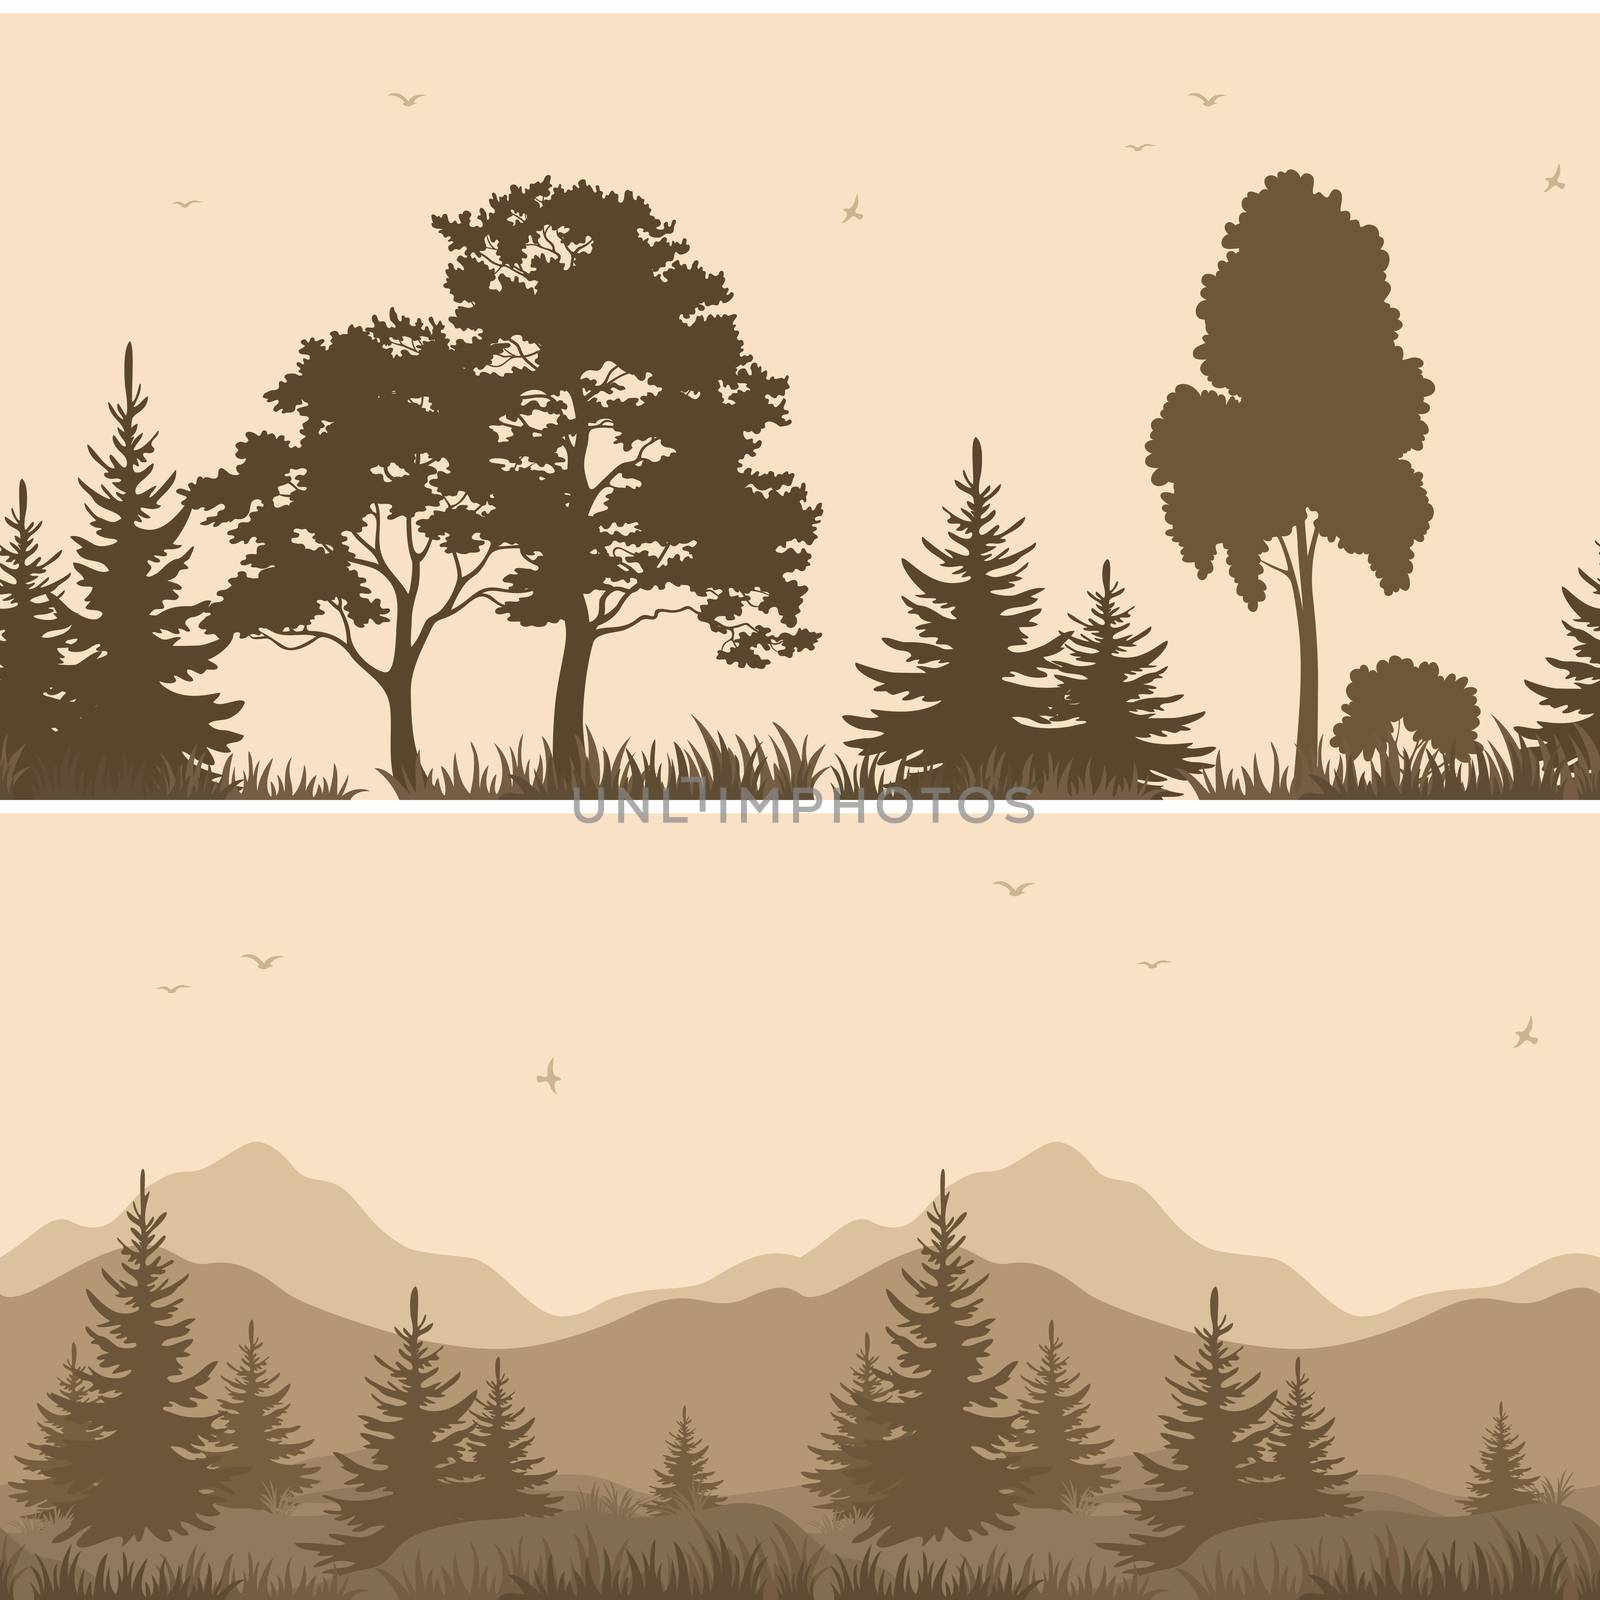 Seamless Mountain Landscape with Trees Silhouettes by alexcoolok